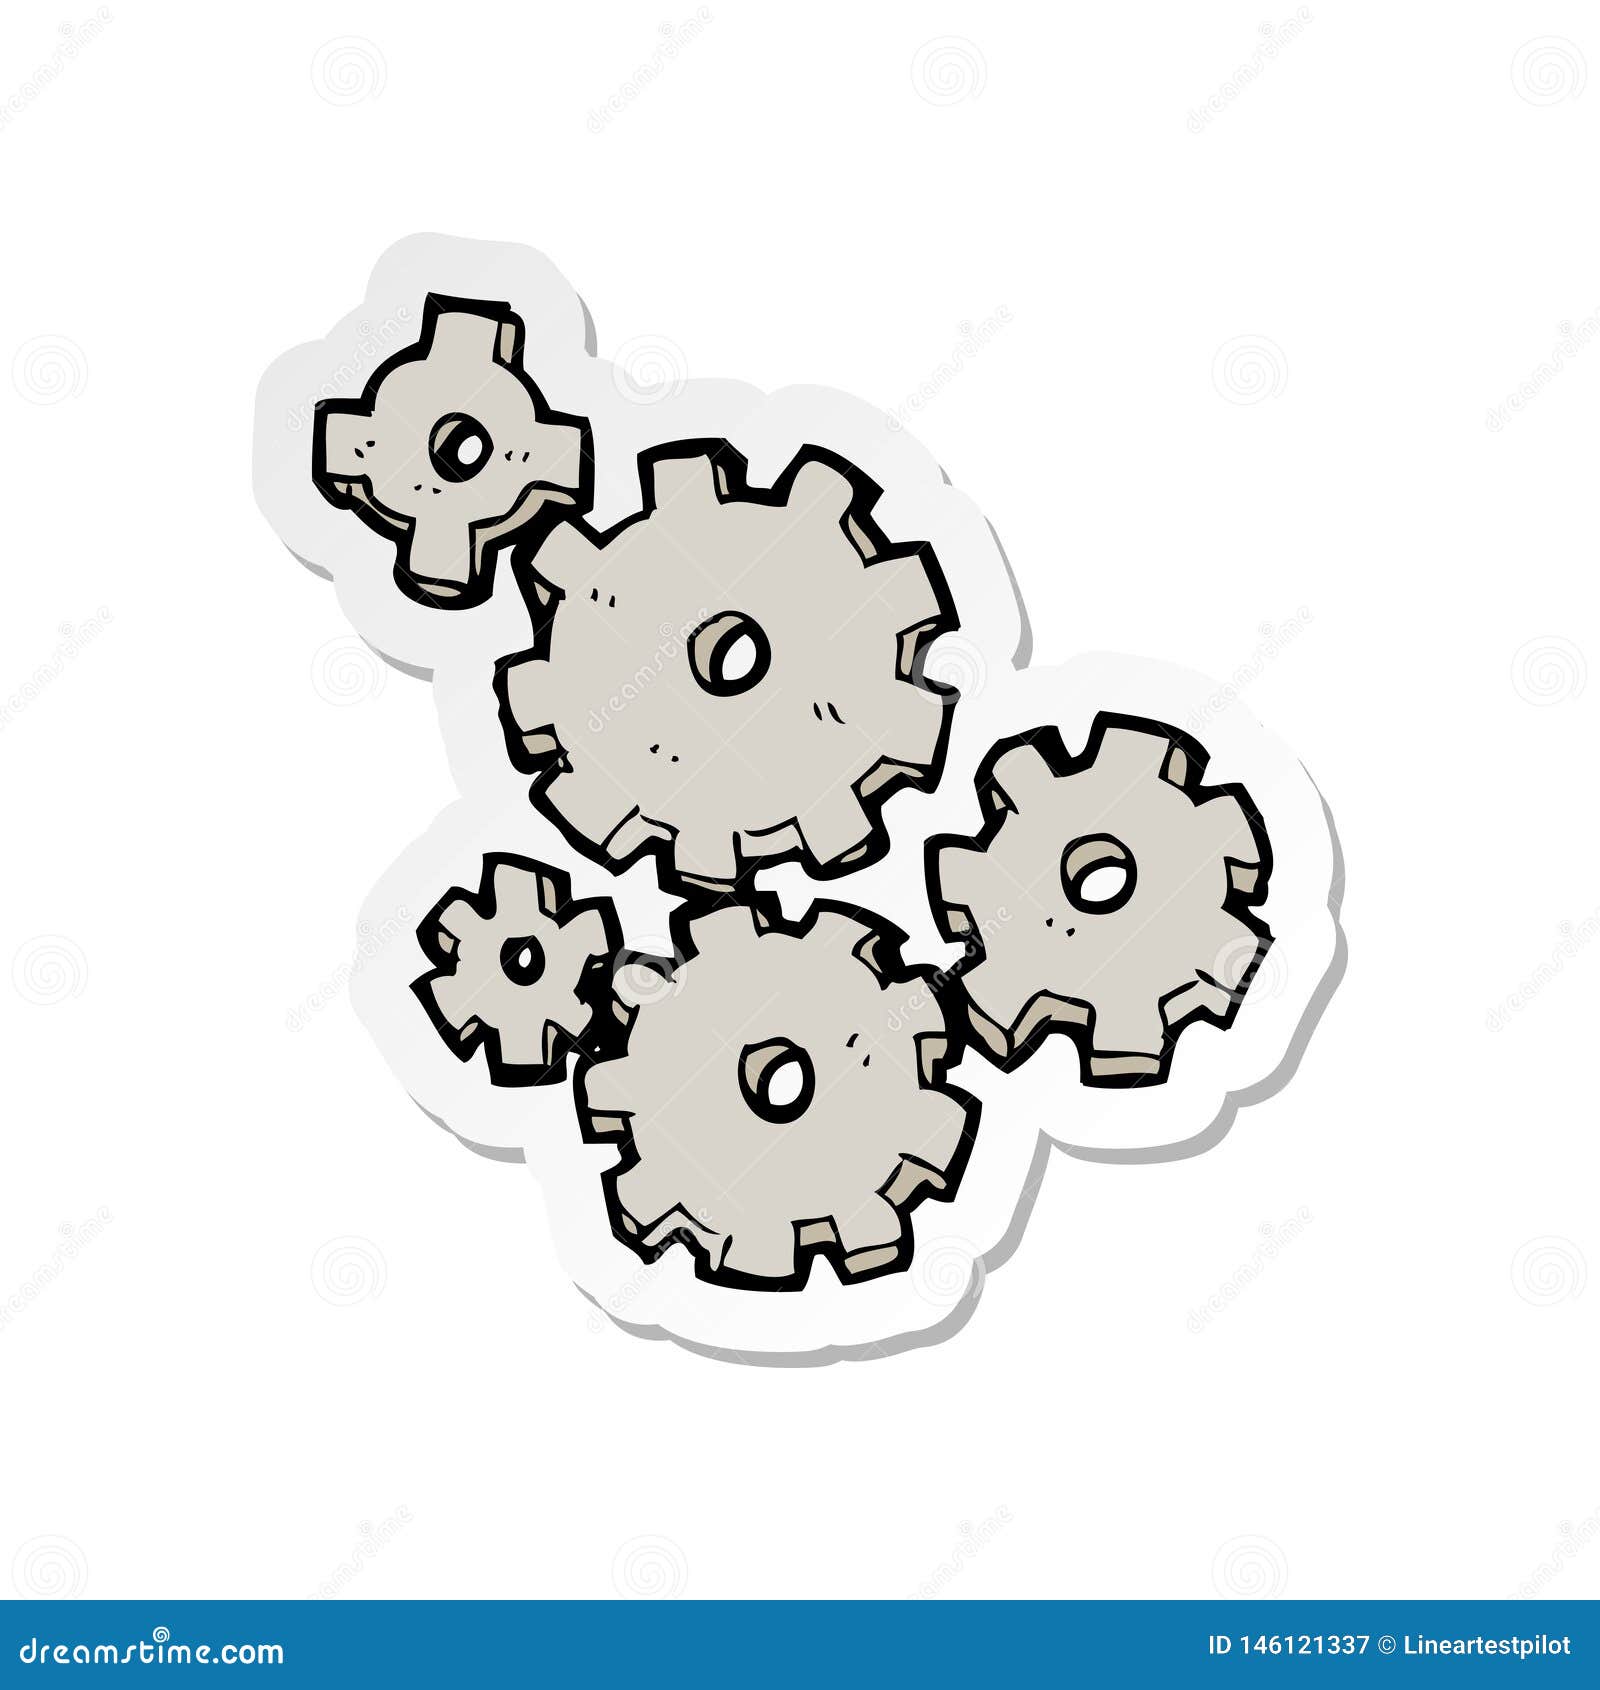 Sticker of a Cartoon Cogs and Gears Stock Vector - Illustration of hand